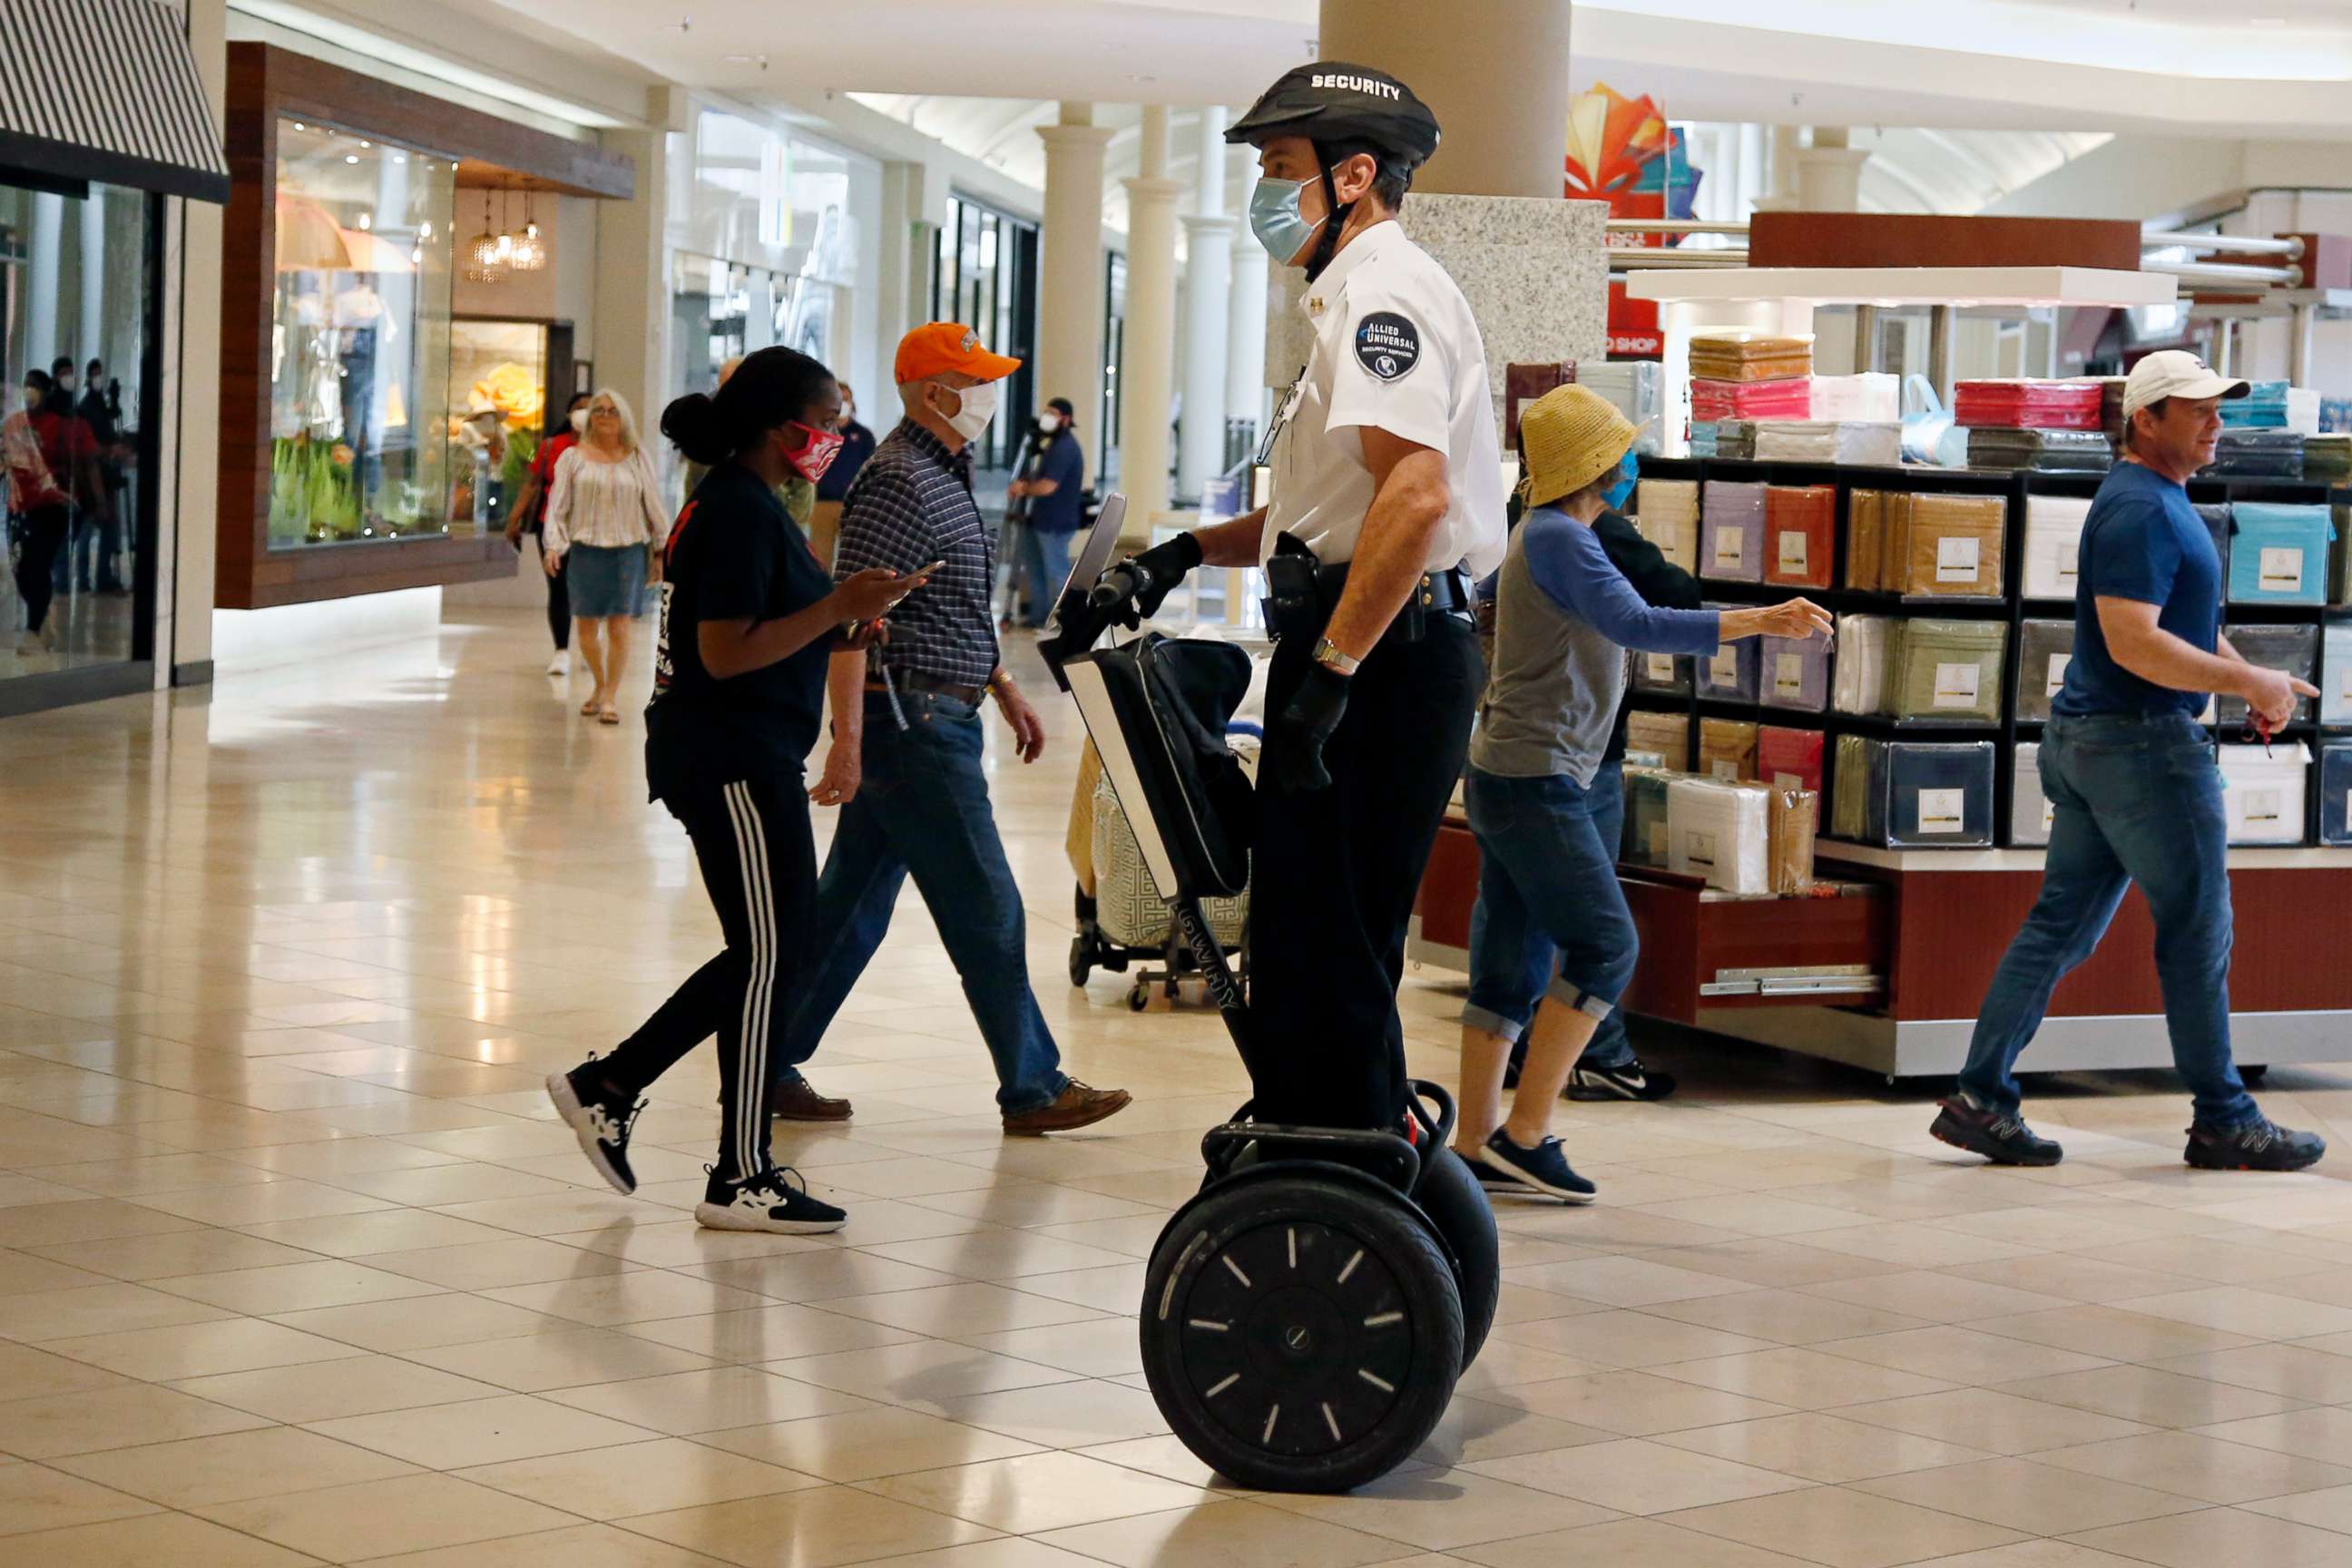 PHOTO: In this May 1, 2020 file photo, a security guard wearing a mask and riding a Segway patrols inside Penn Square Mall as the mall reopens in Oklahoma City.